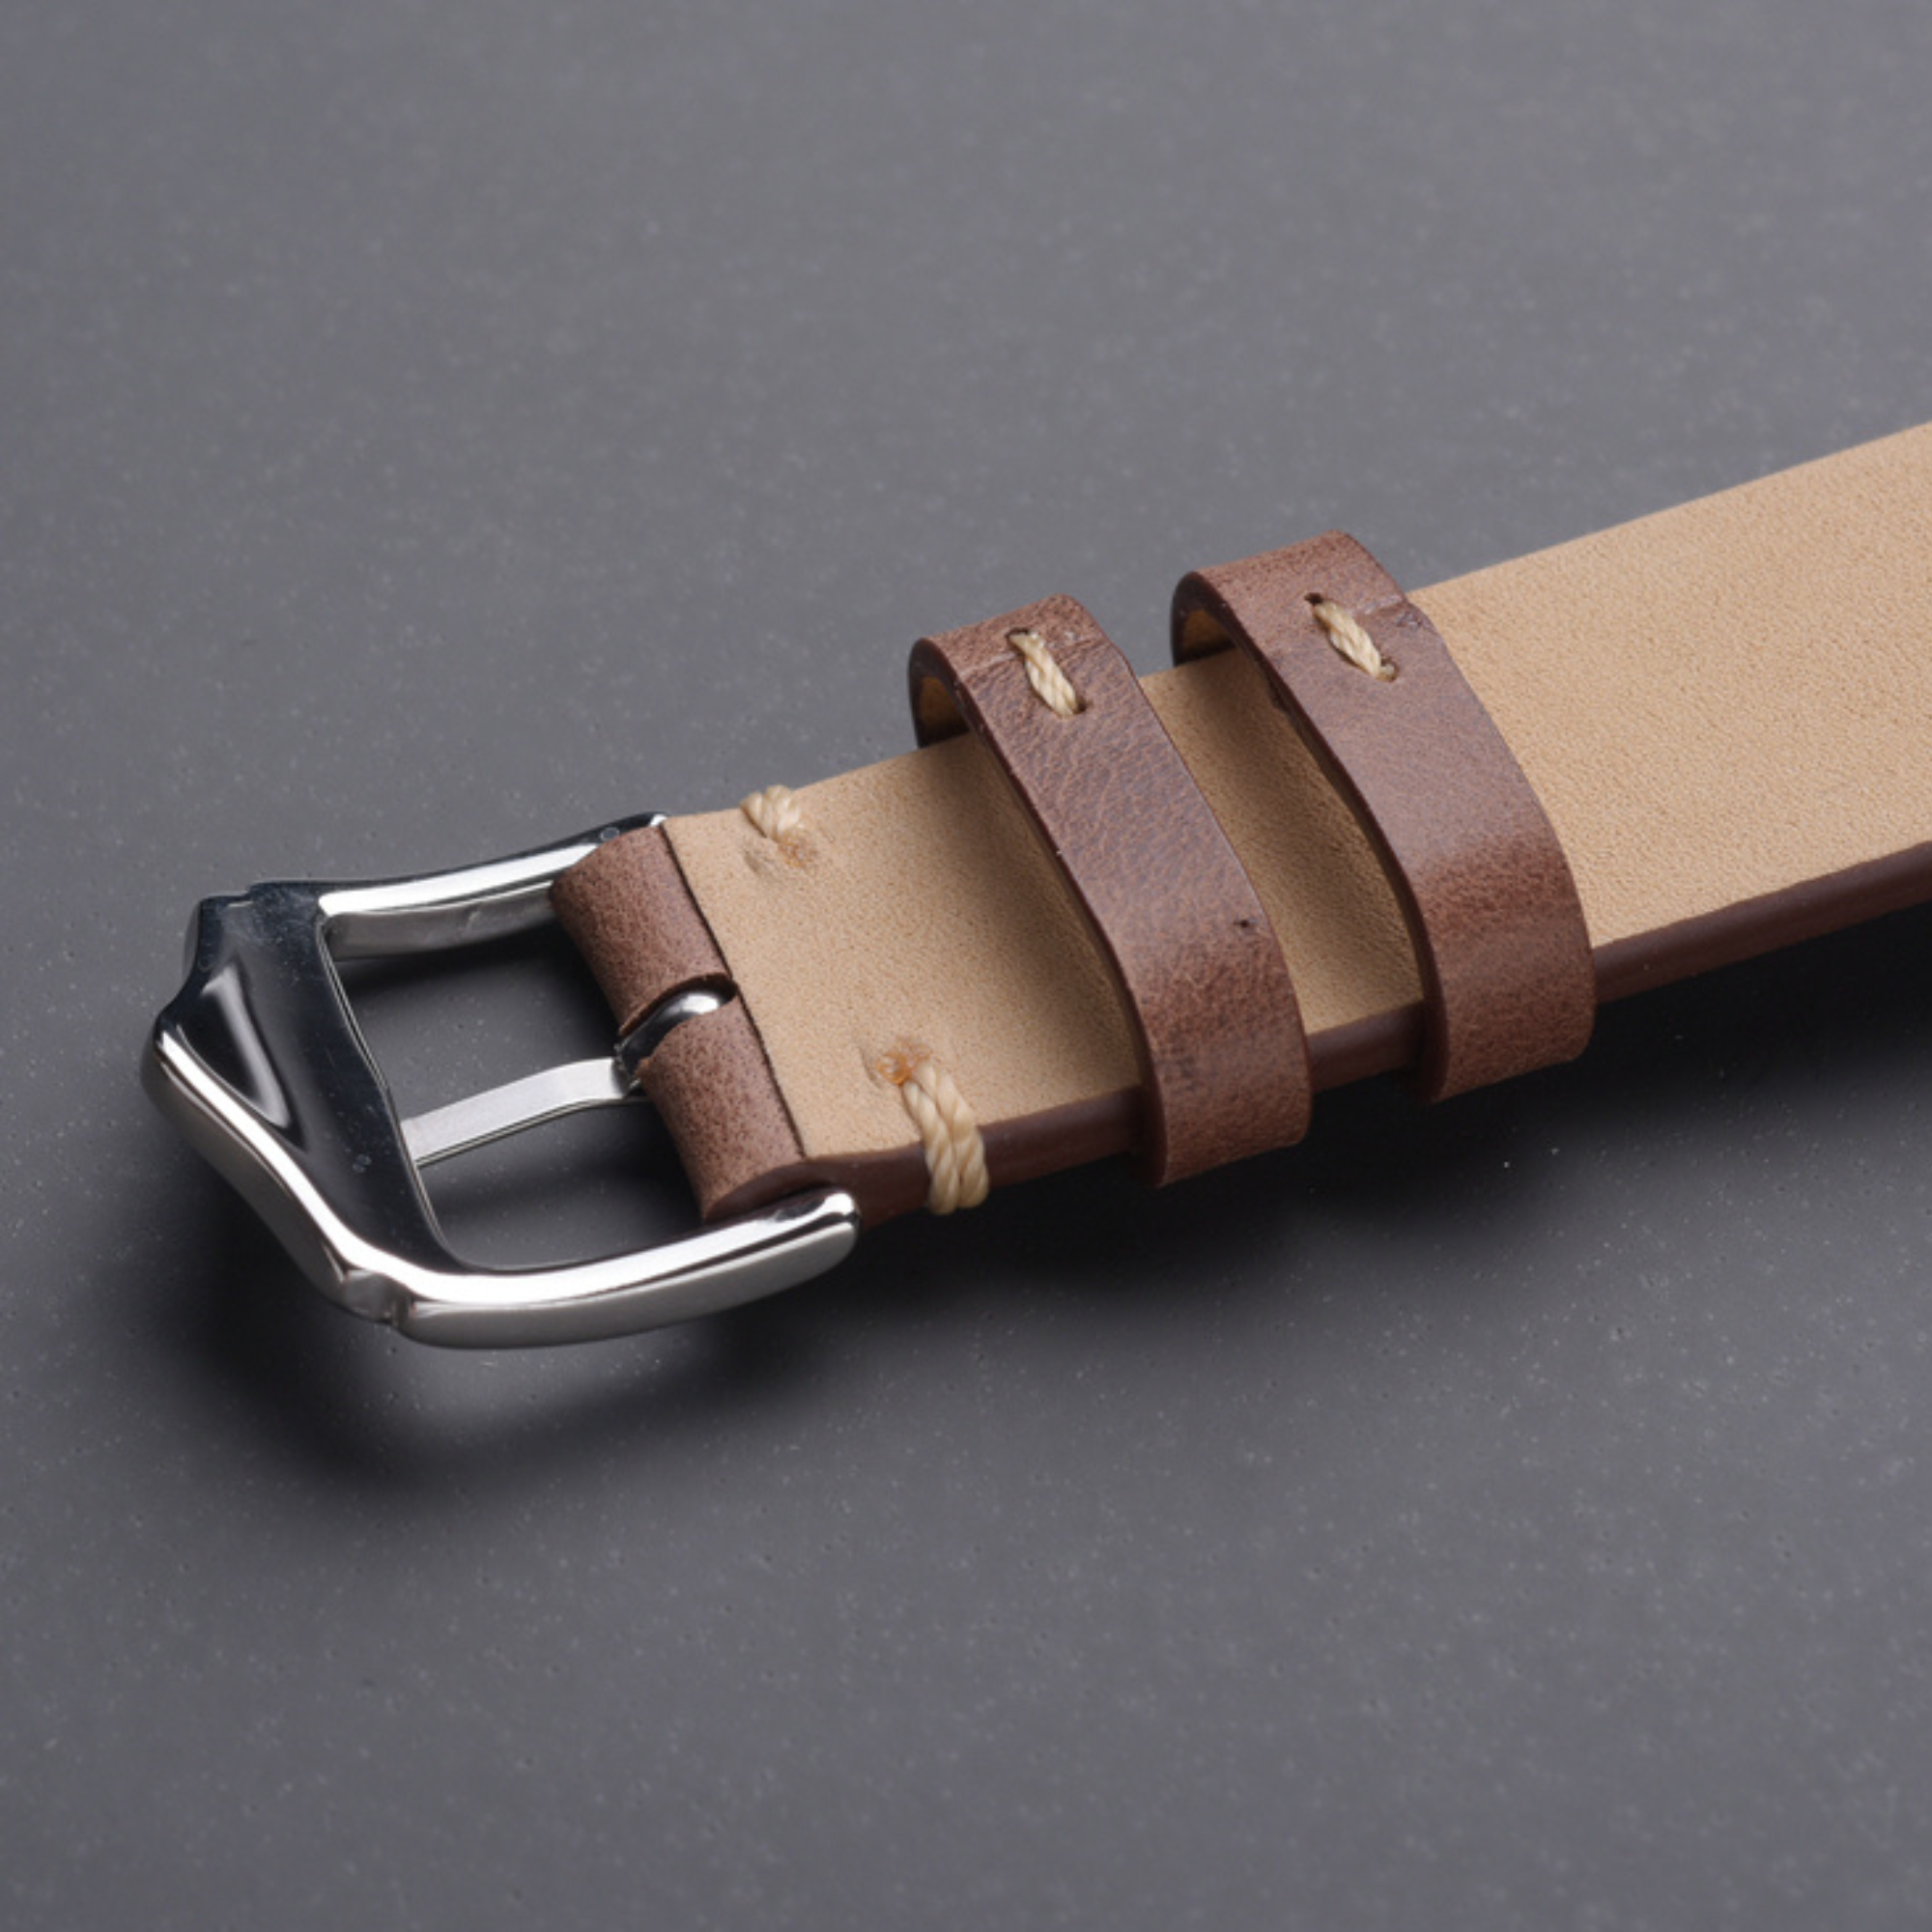 Genuine Leather Watch Strap Watchband Accessories 20mm - Light Brown watch leather strap band india online dream watches